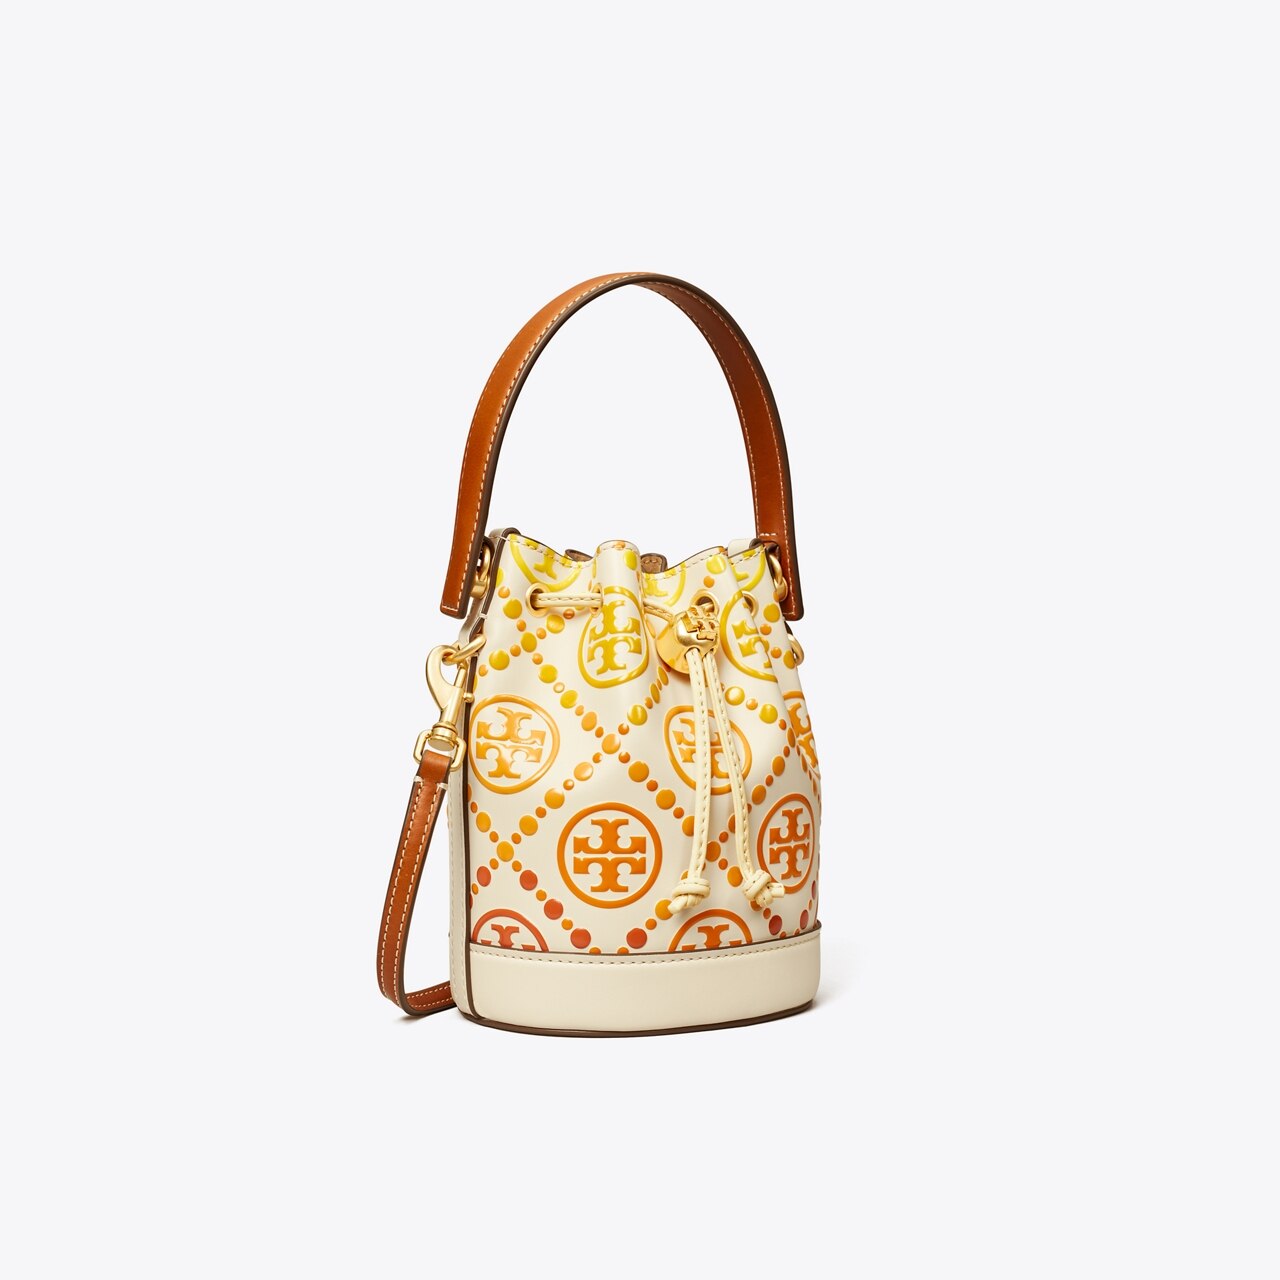 Tory Burch Accessories for the Month of Love - Time International